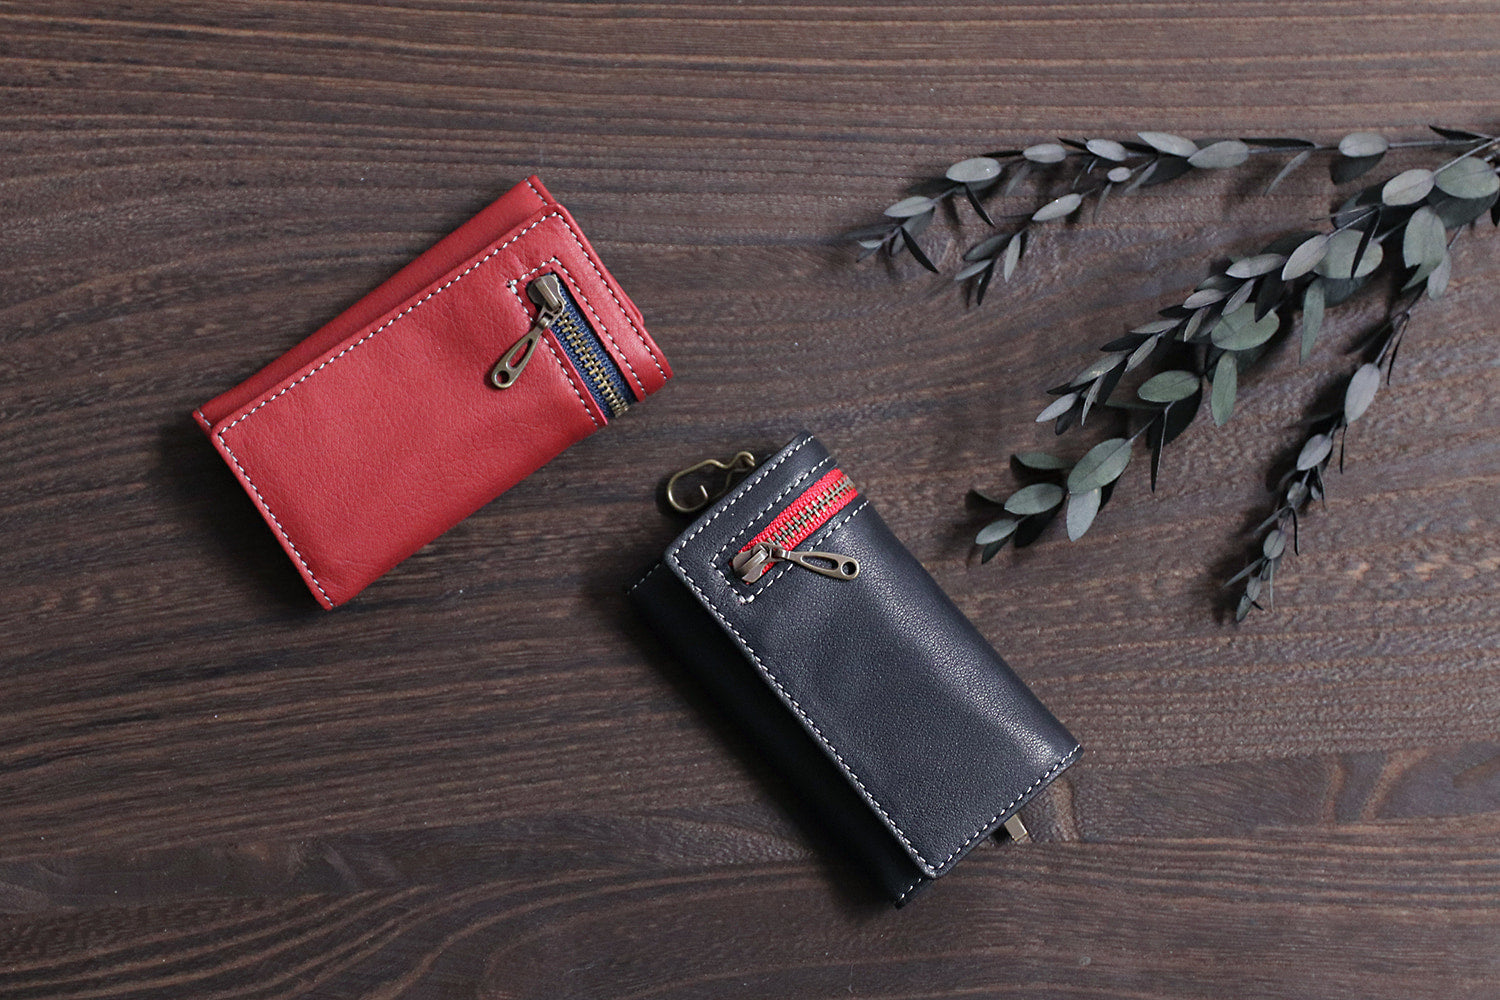 FU-SI FERNALLE /DAMAGE 301 Finishes available. A key case made of high-quality soft leather with a vintage feel.